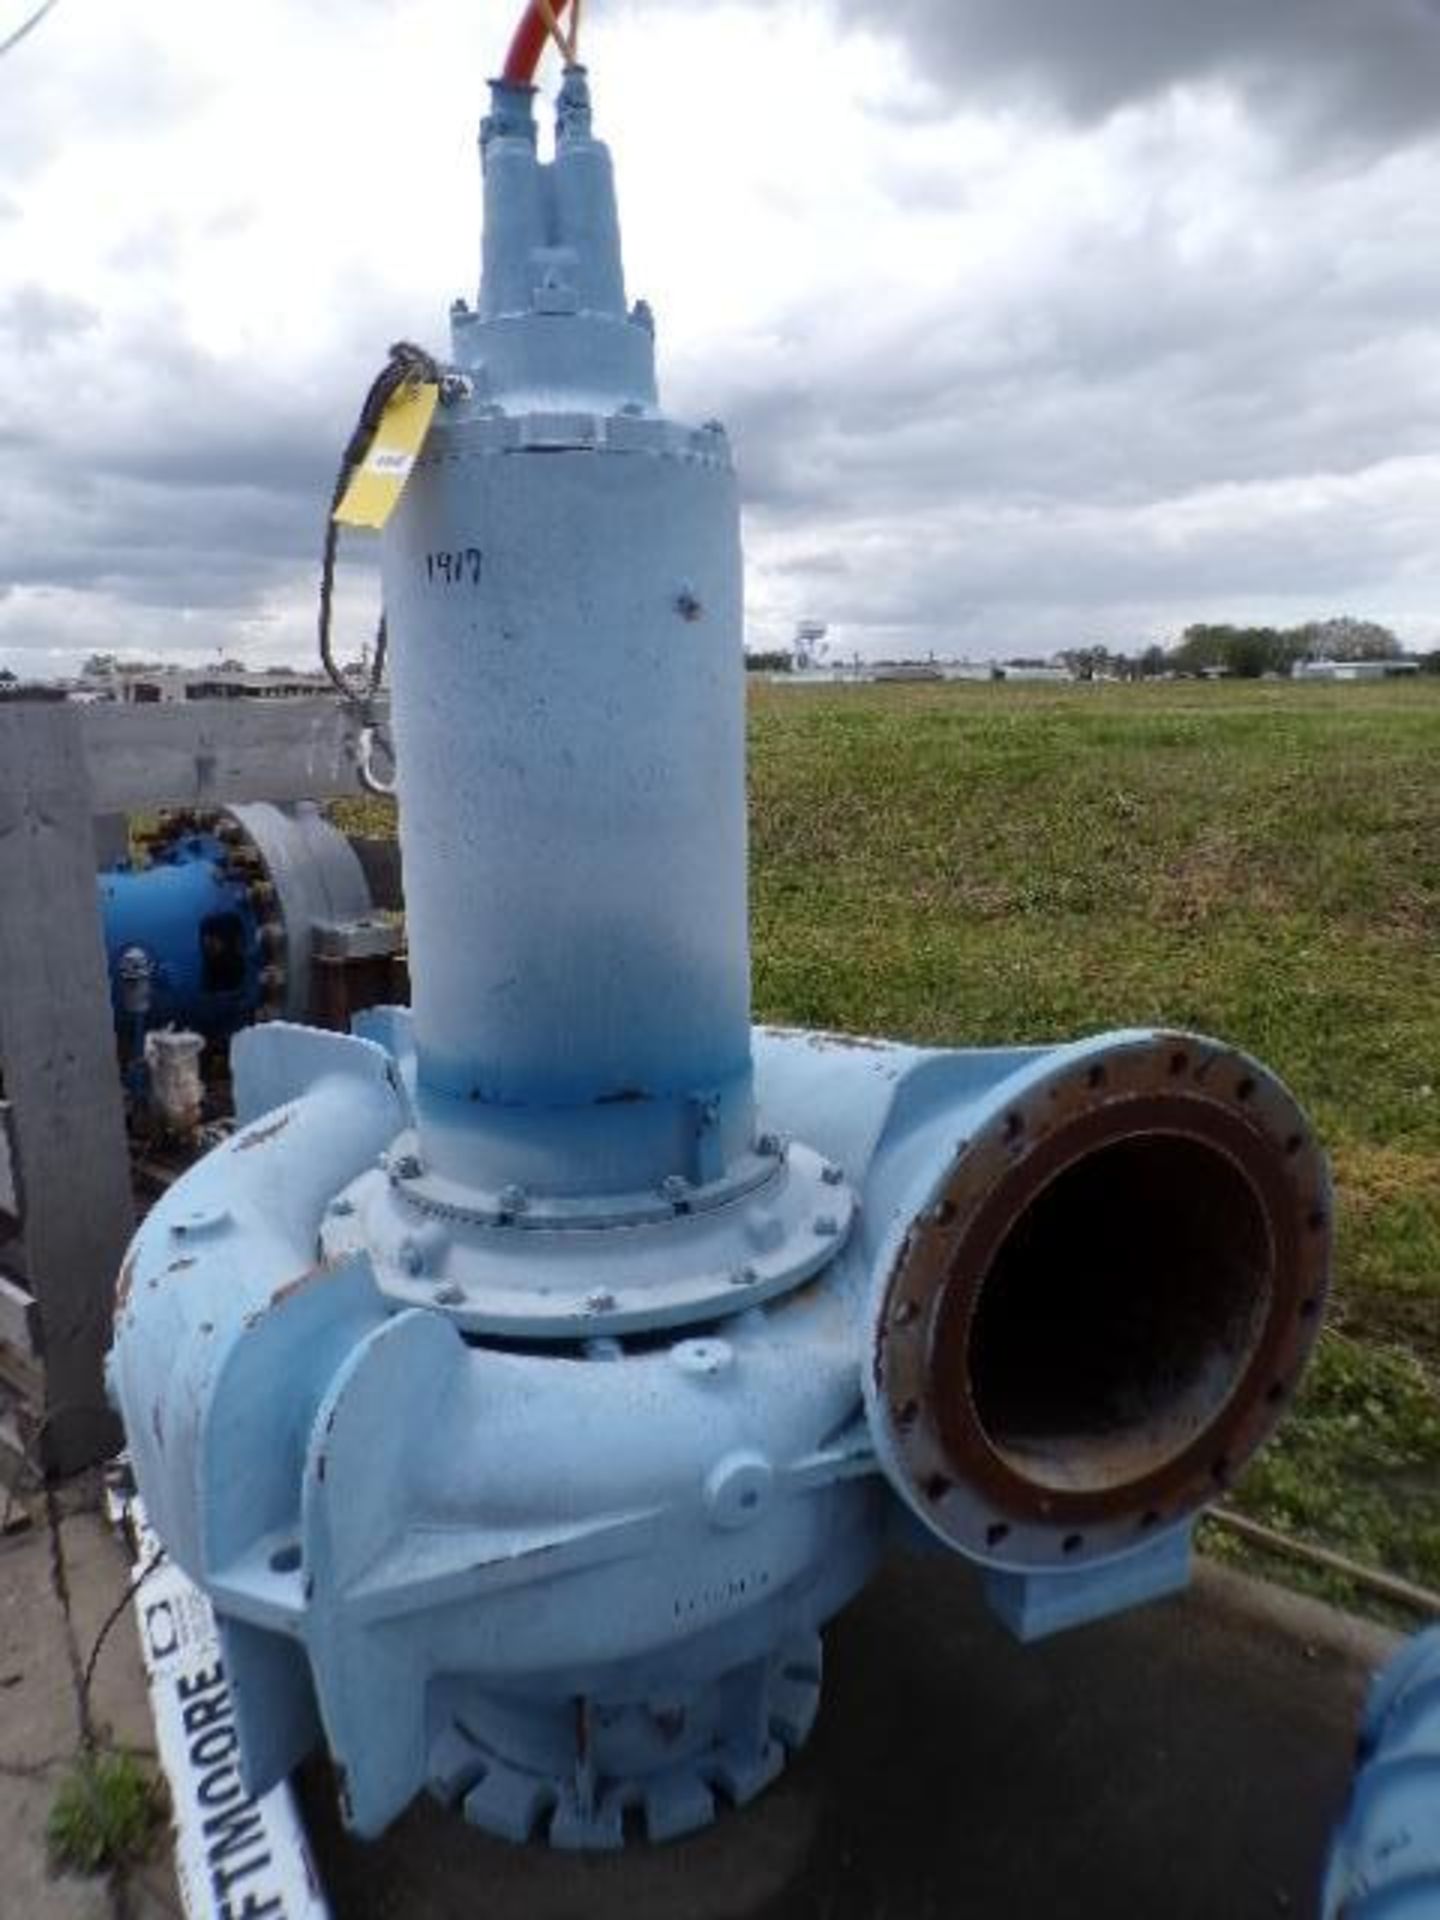 Hidrostal Submersible Pump, Model IE558-KYAK + XS1A8I-20, S/N 216642 (Used) - Image 2 of 4